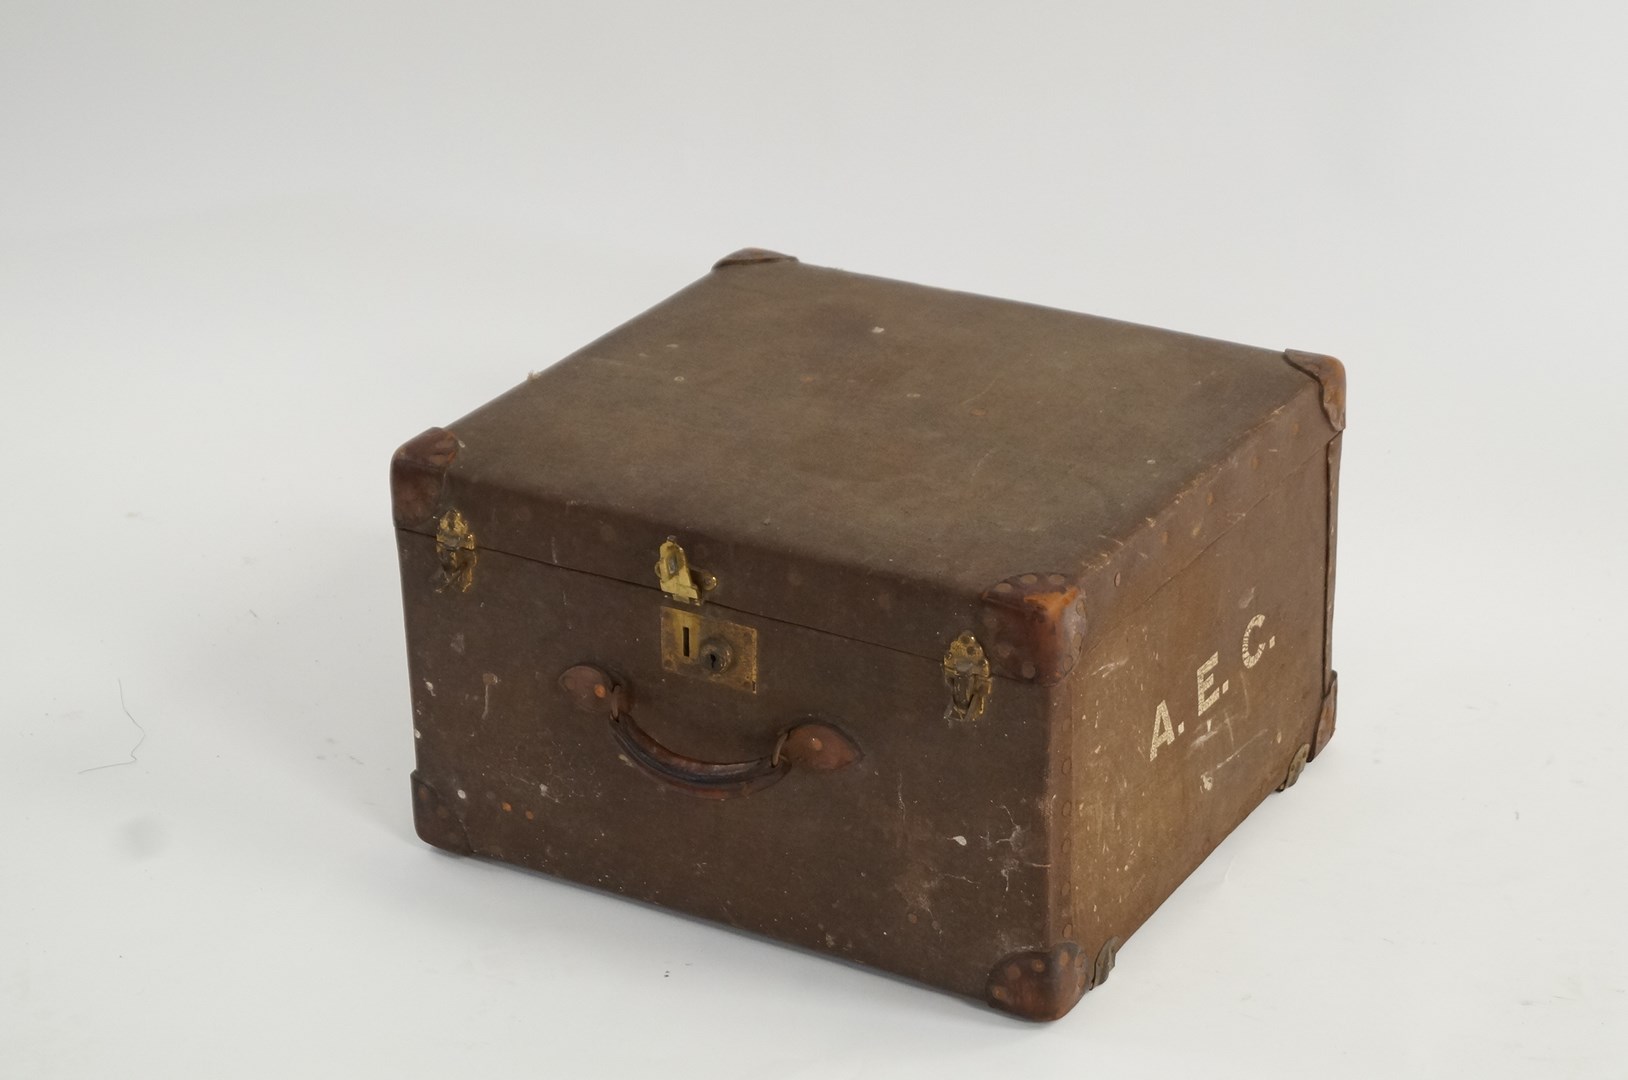 An early 20th century travelling trunk. with leather handle and fitting. Harrods label to the